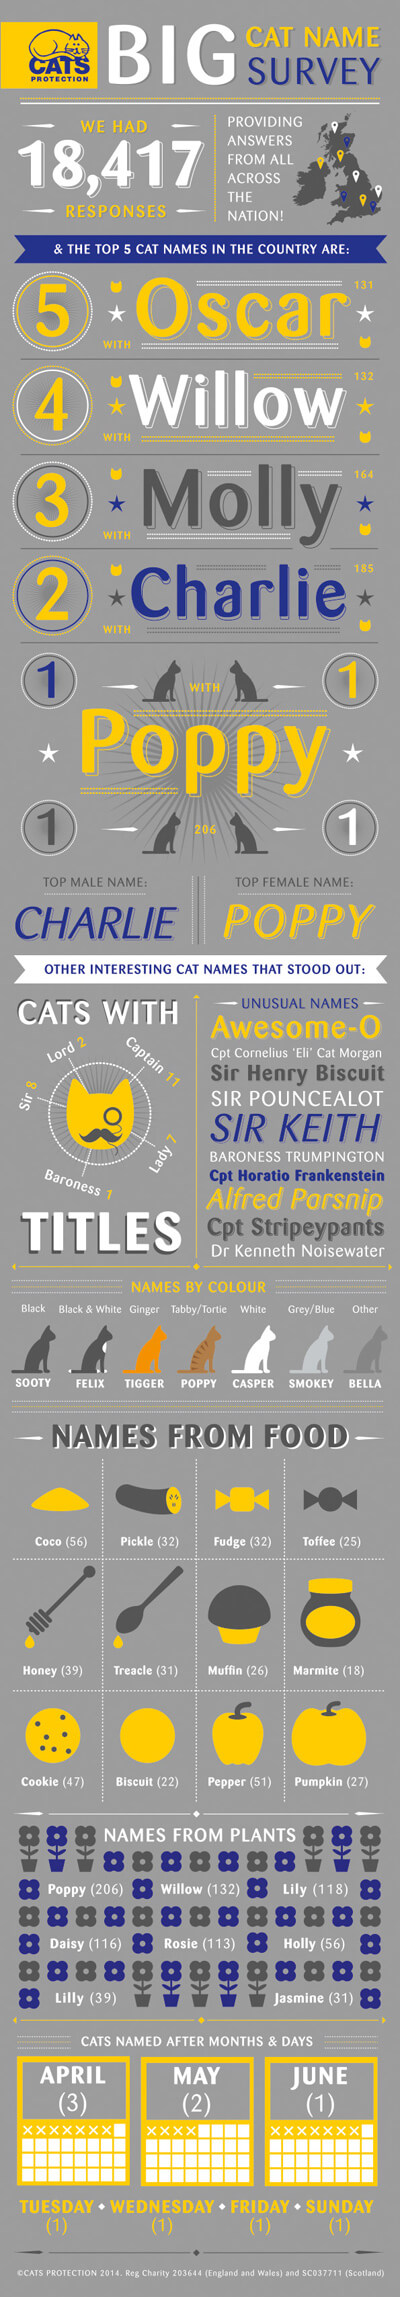 Cat name infographic